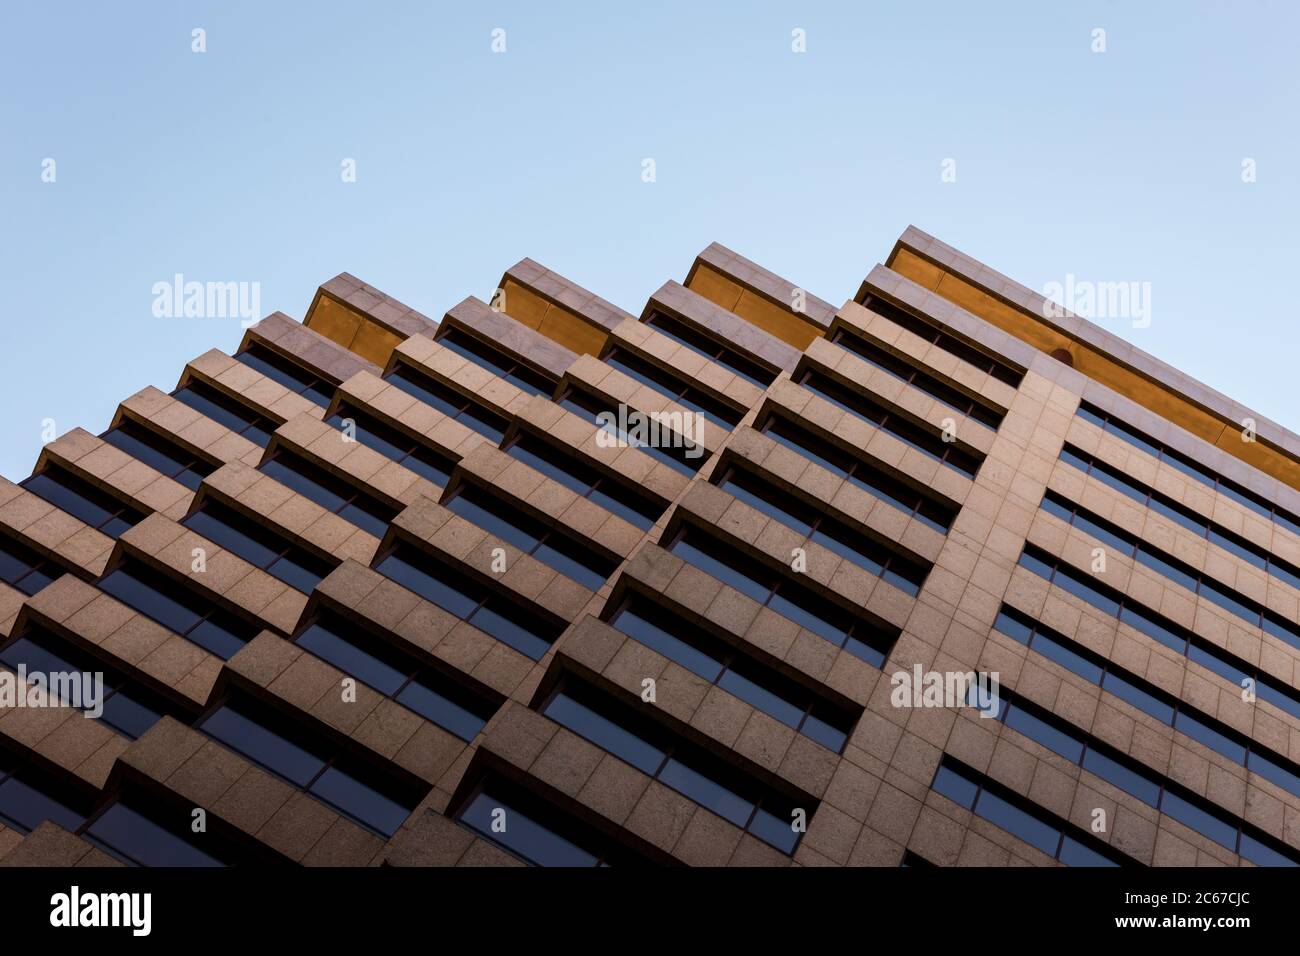 Abstract Geometric Architecture Stock Photo